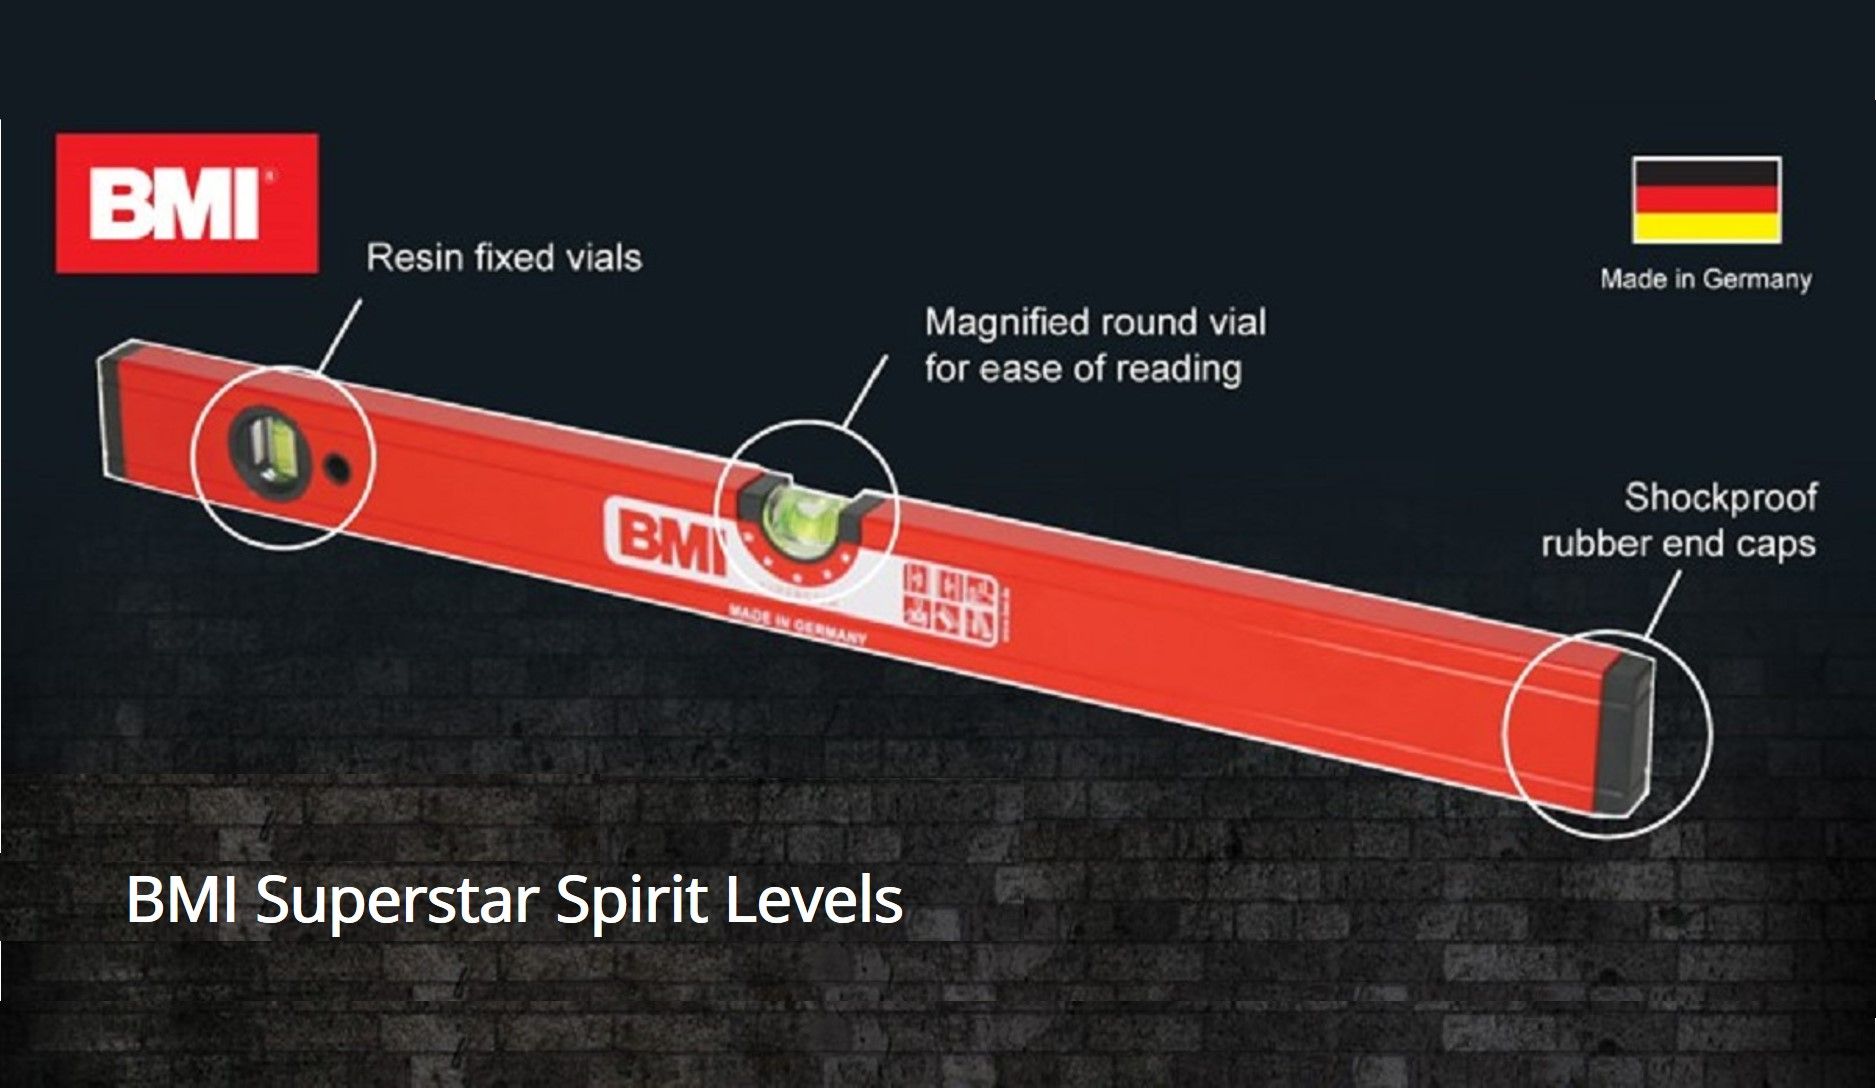 BMI superstar spirit levels for professional tilers available at Amark Group